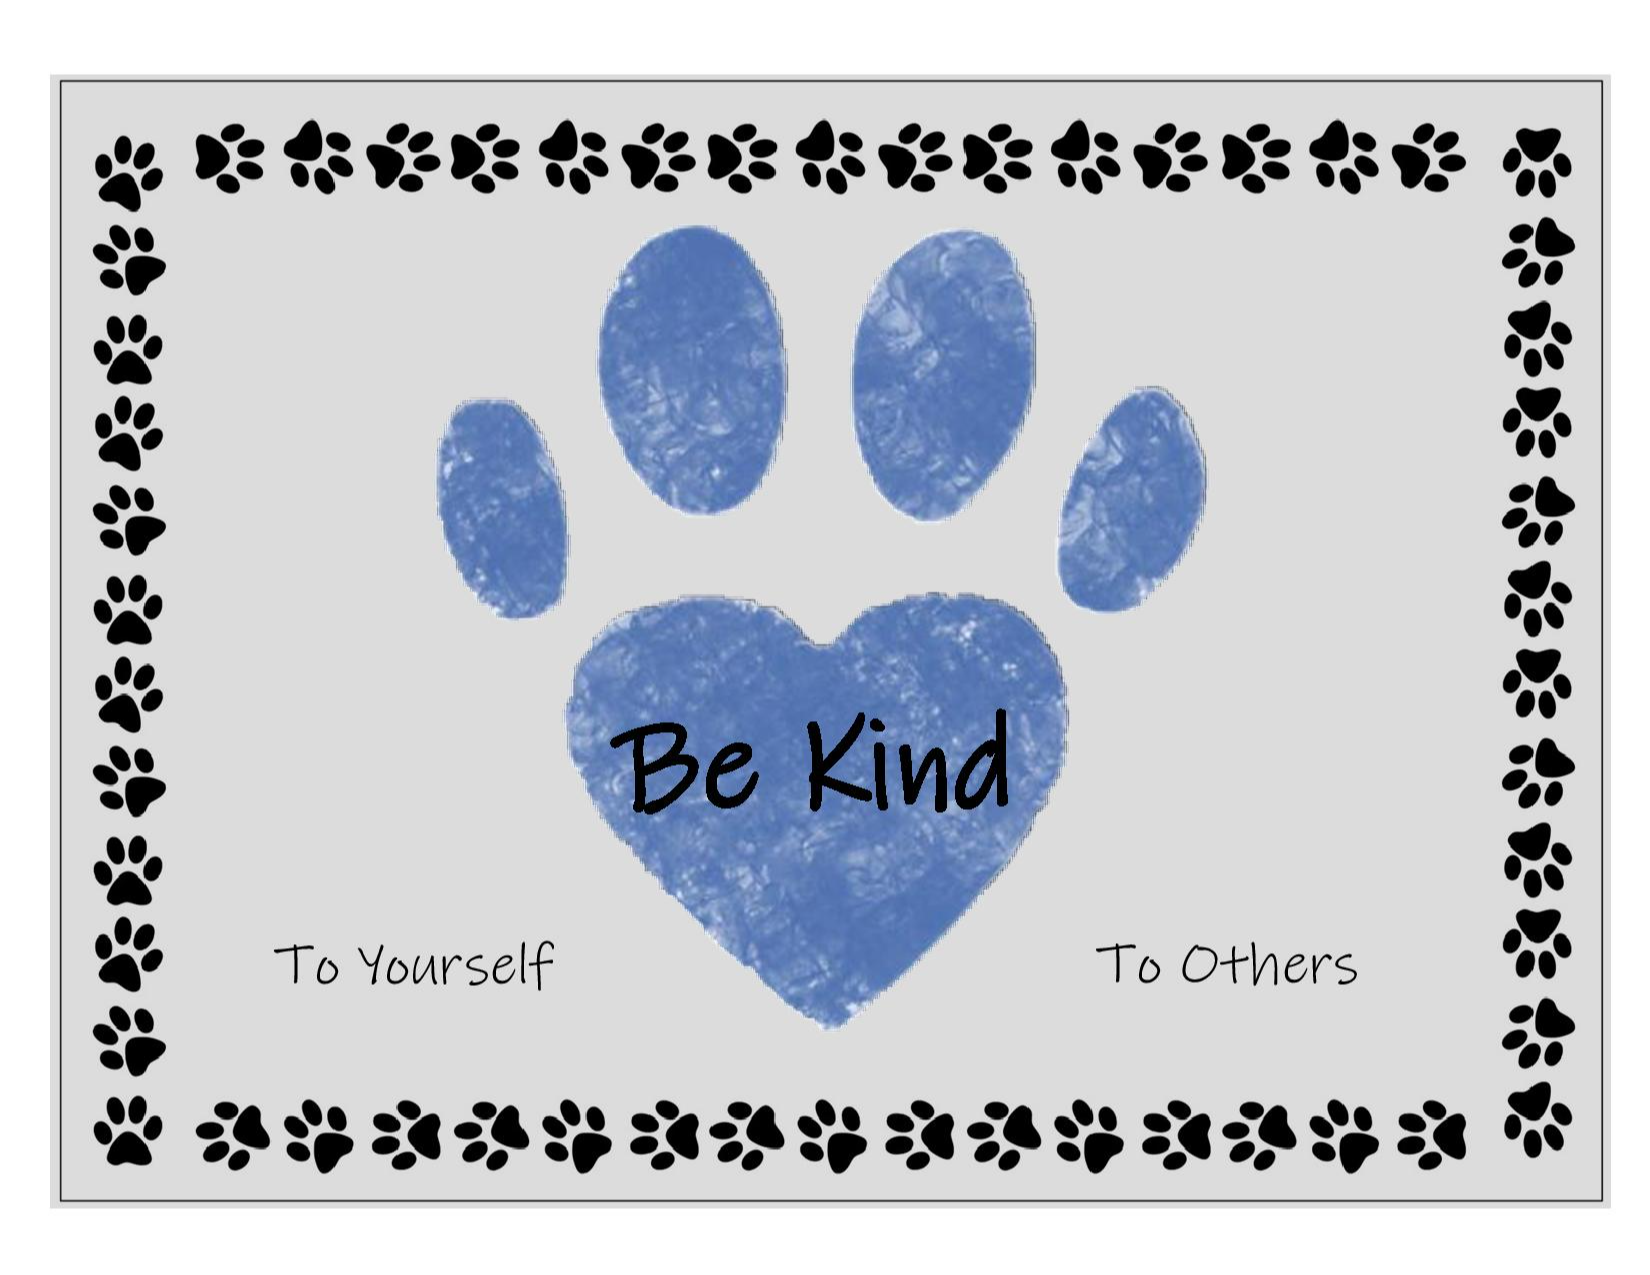 Be Kind Image - Be Kind to Yourself and to Others